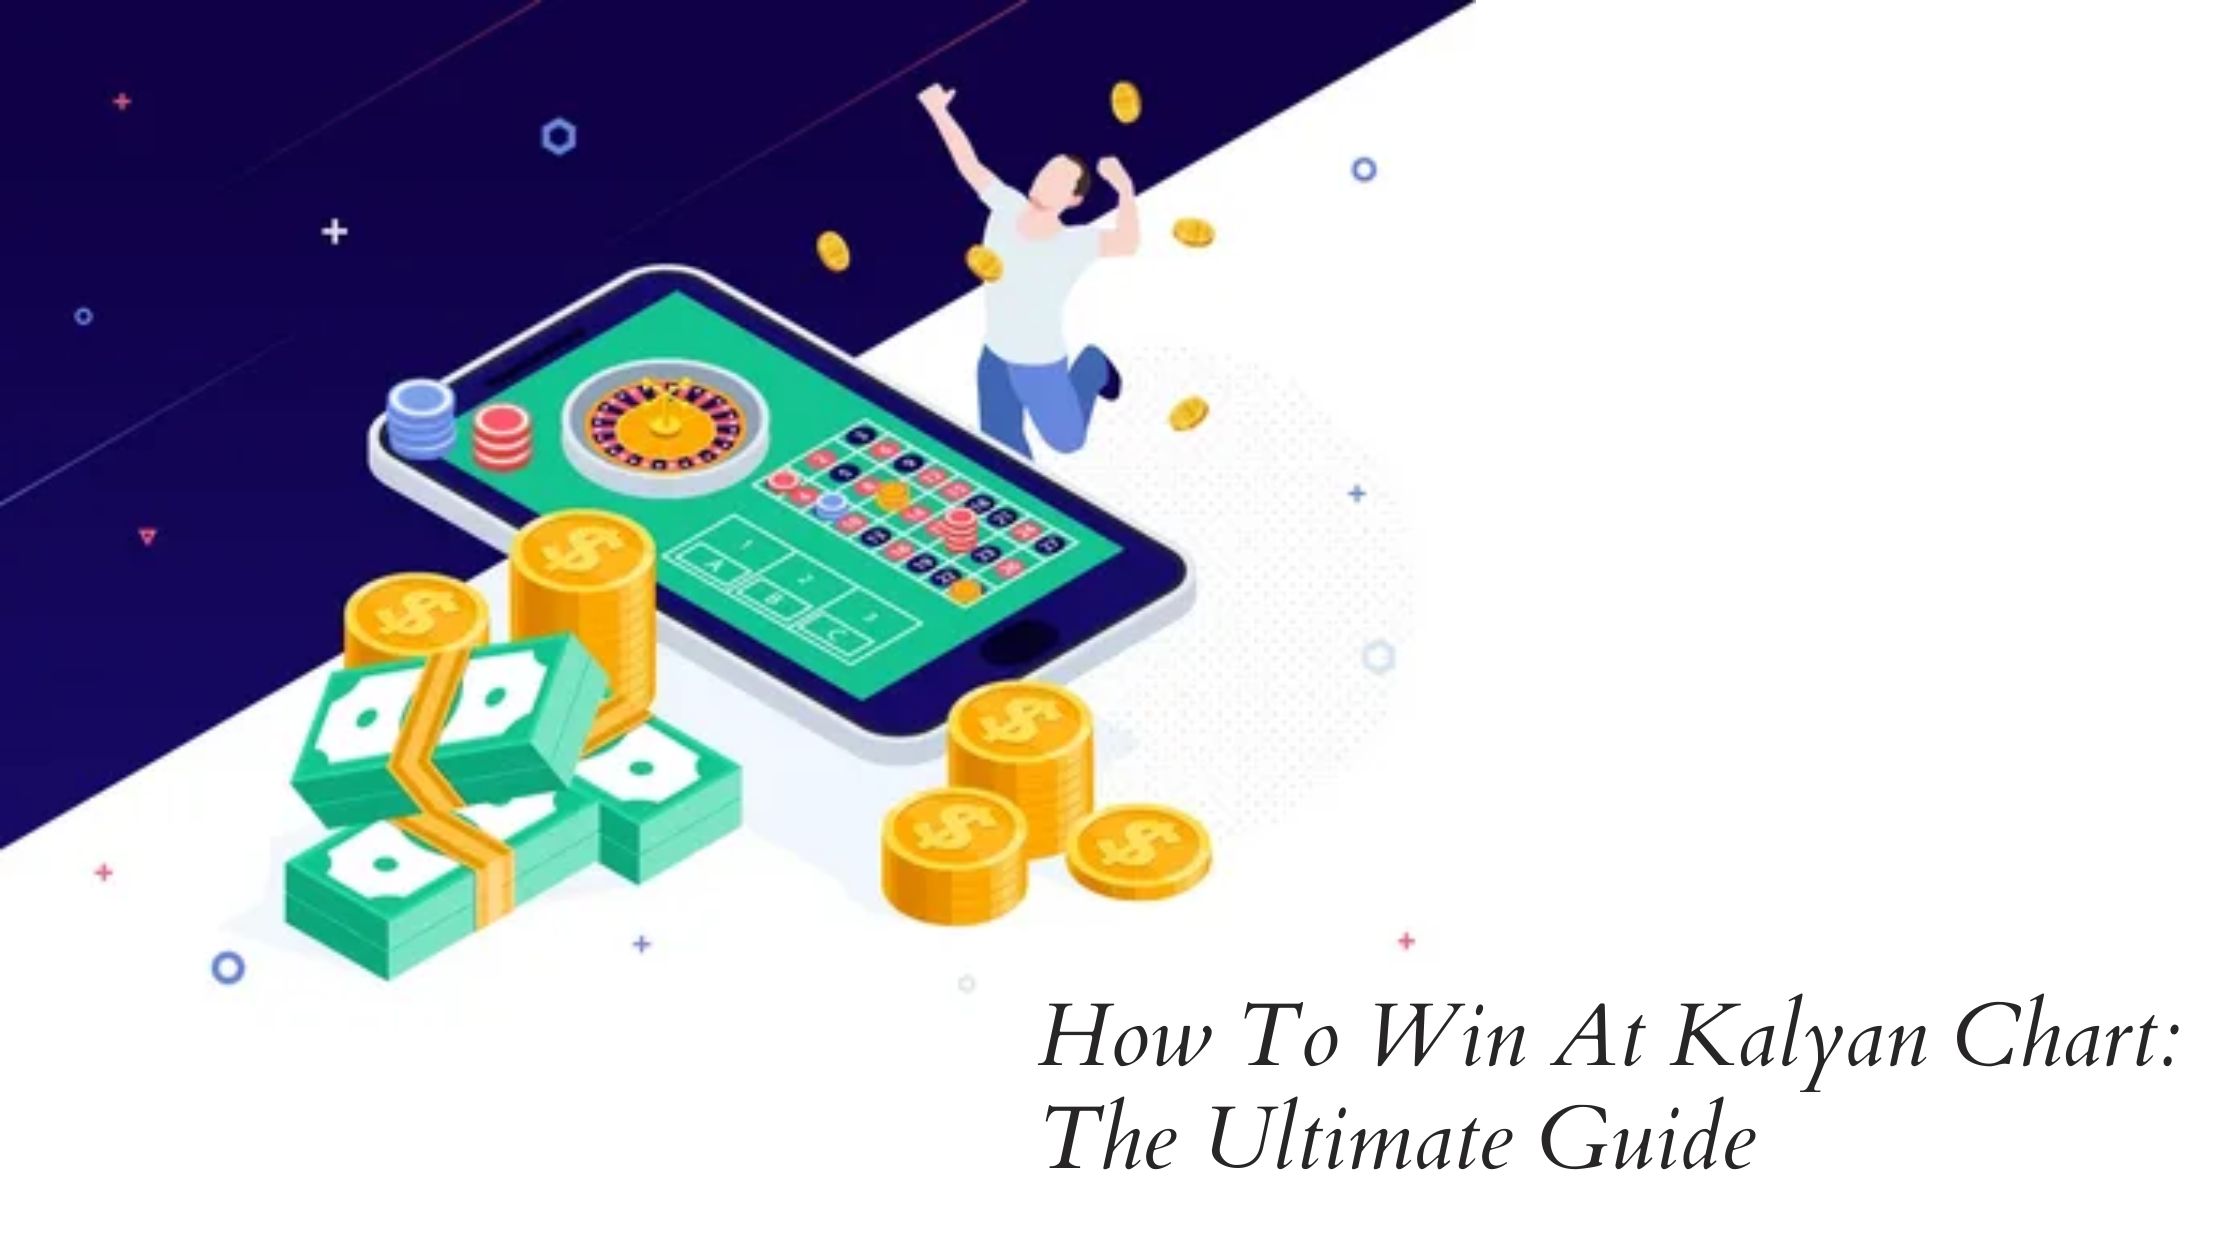 How To Win At Kalyan Chart: The Ultimate Guide